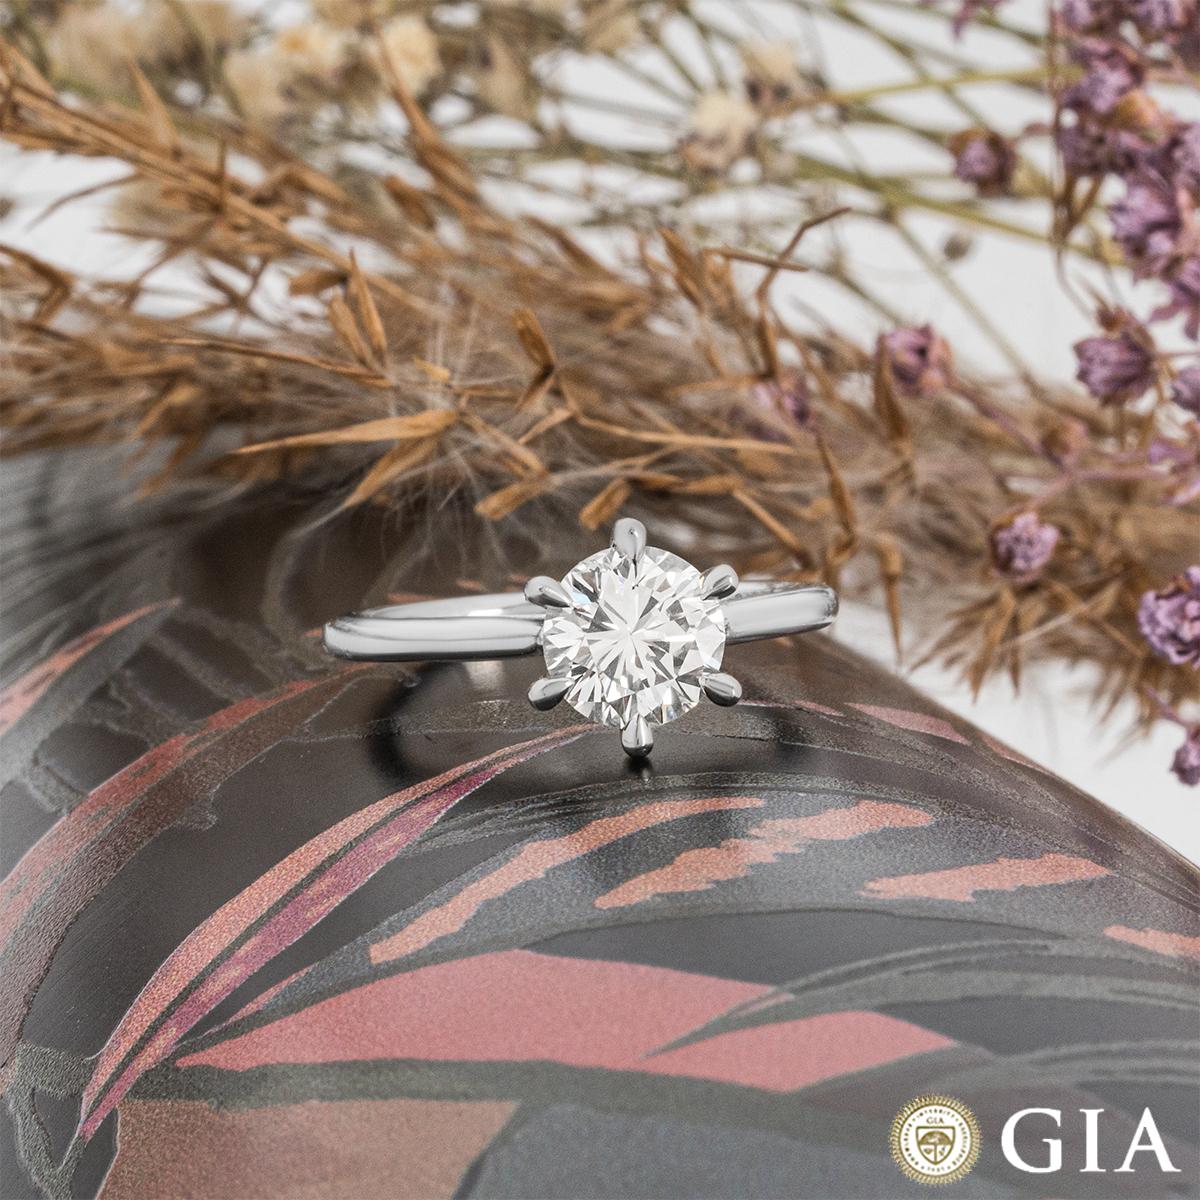 GIA Certified Platinum Round Brilliant Cut Diamond Ring 1.32ct K/SI2 For Sale 2